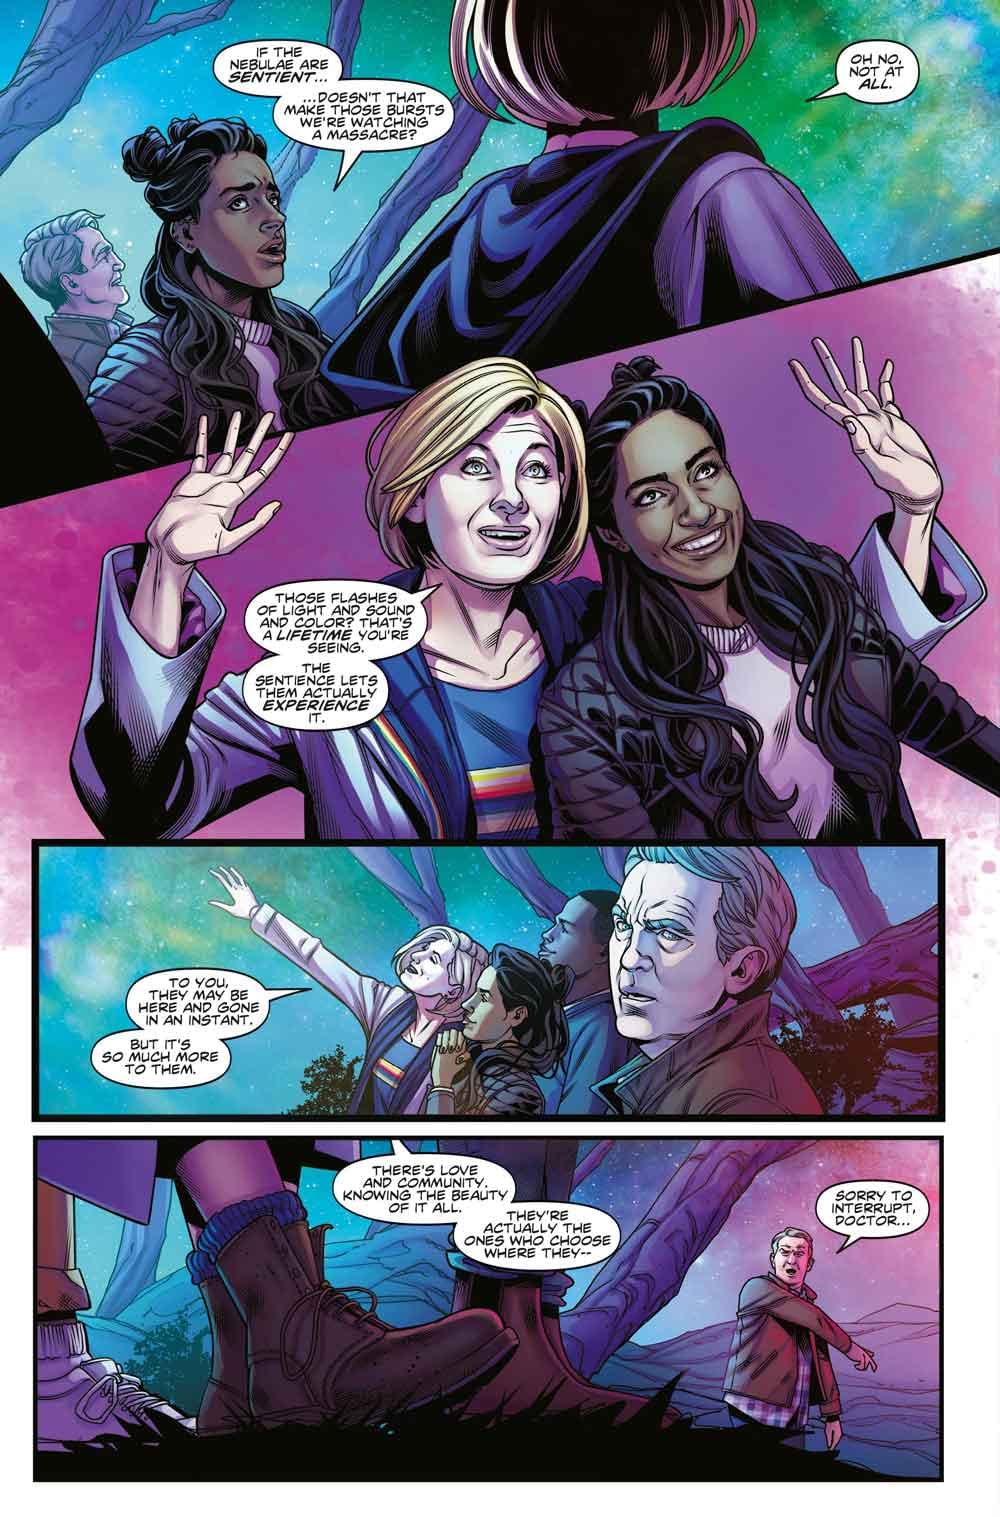 4 Pages From Next Week's Doctor Who: The Thirteenth Doctor #1